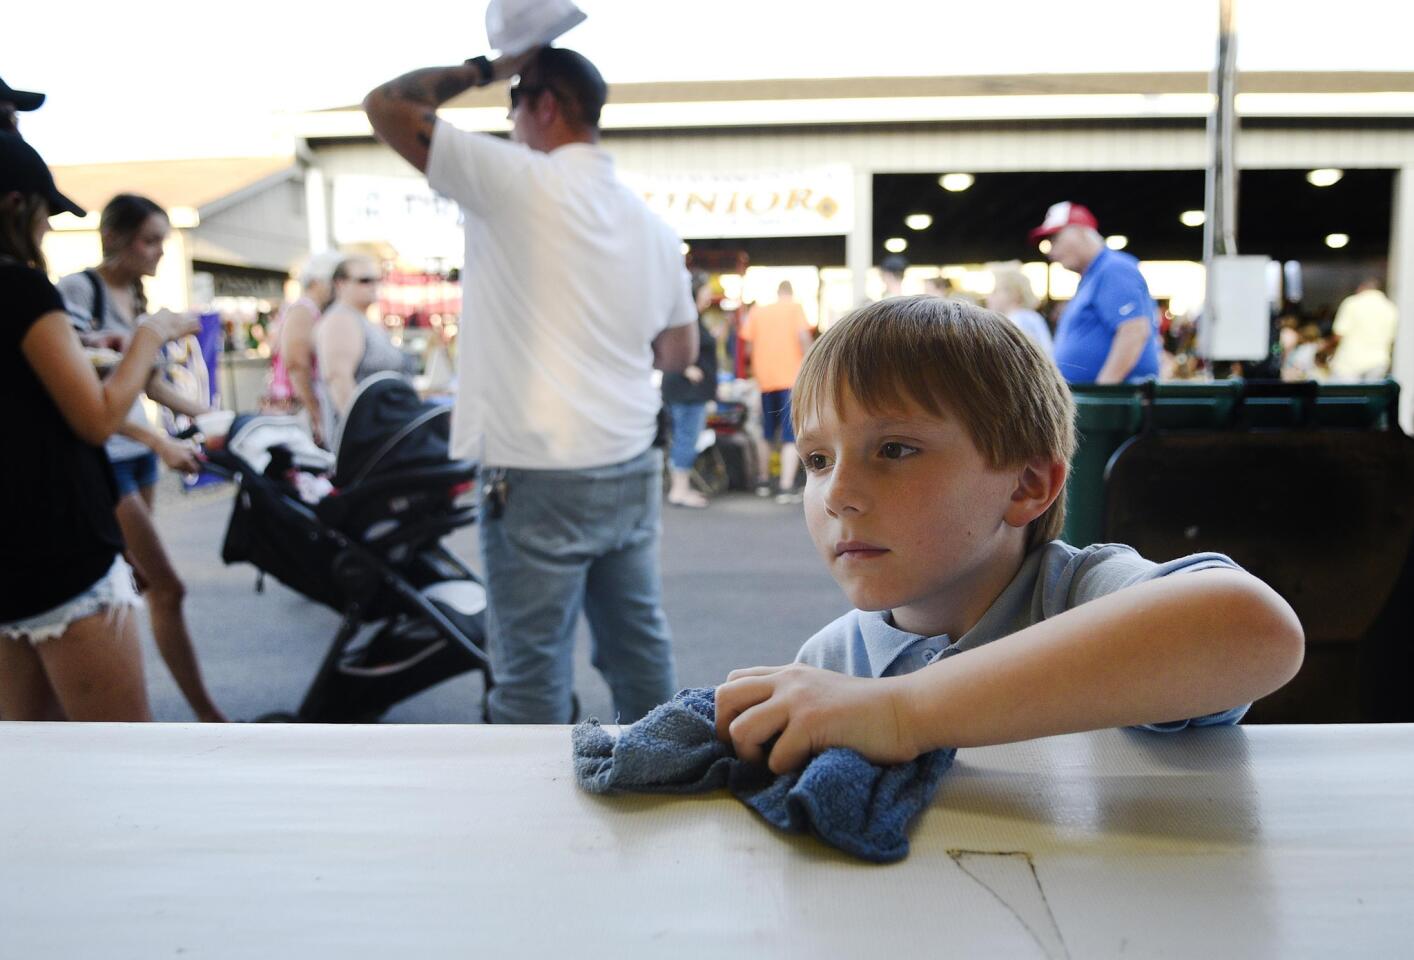 Austin Warner, 6, helps out by wiping down the counter at the Winfield fire company's funnel cake stand at the fire company's annual carnival Wednesday, July 10, 2019.